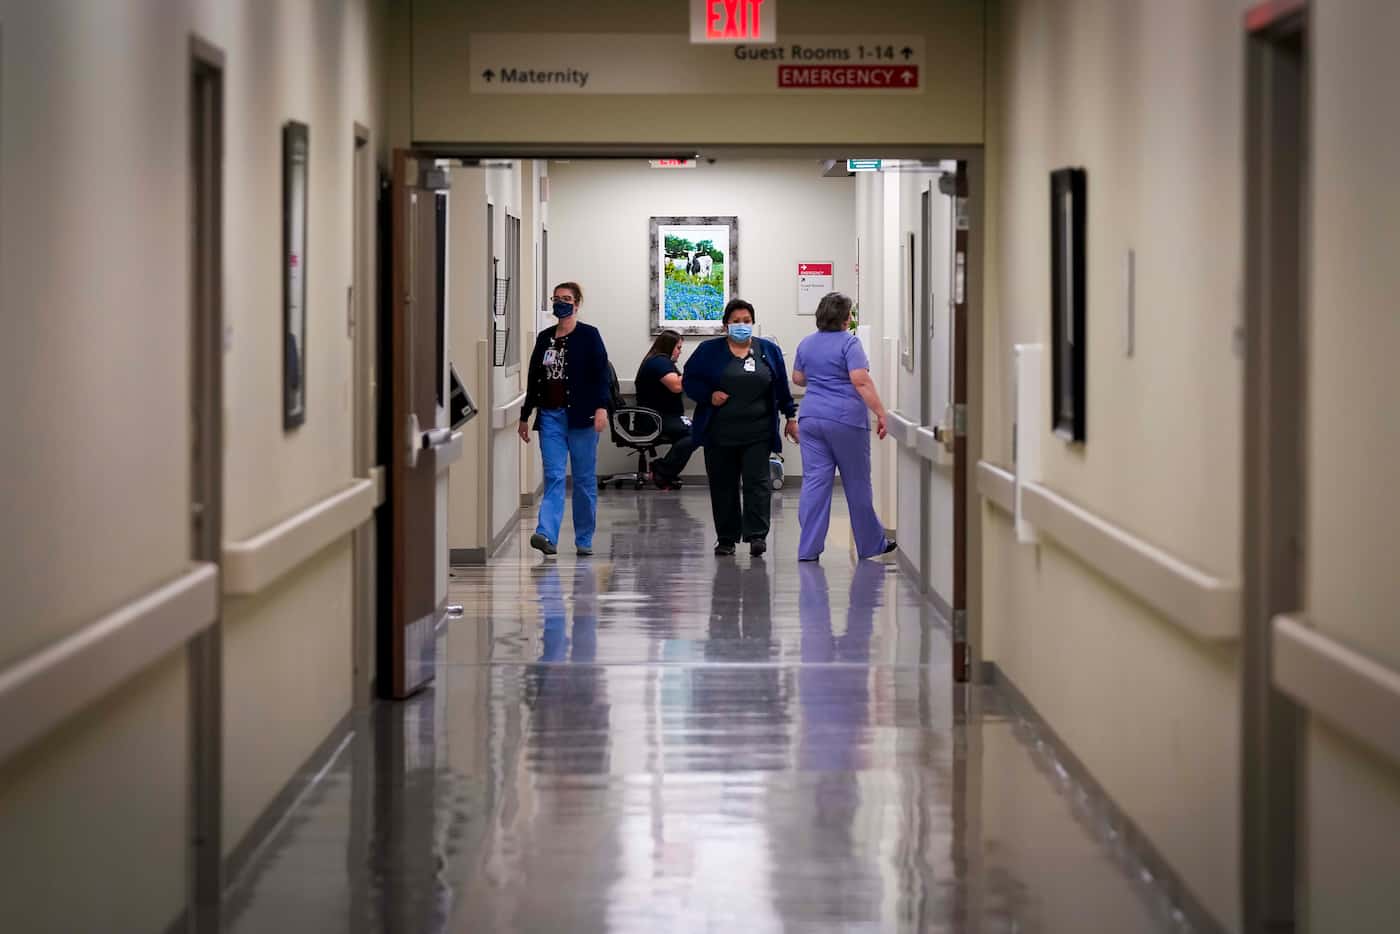 Staff members at Faith Community Hospital move between rooms on May 14.